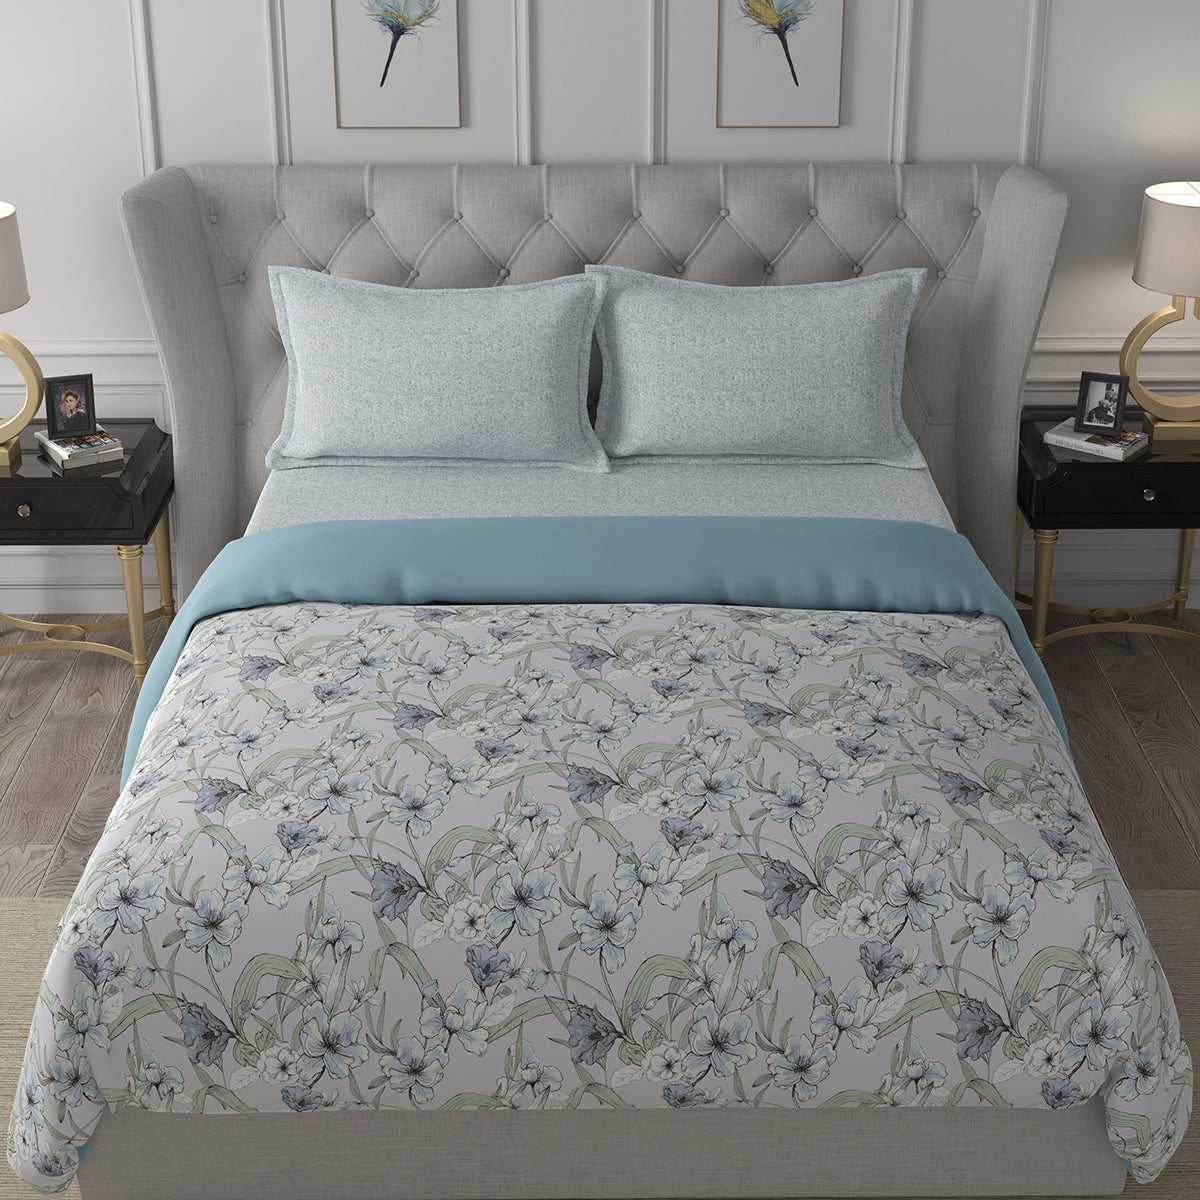 Backyard Patio Valencia Summer AC Quilt/Quilted Bed Cover/Comforter Aqua